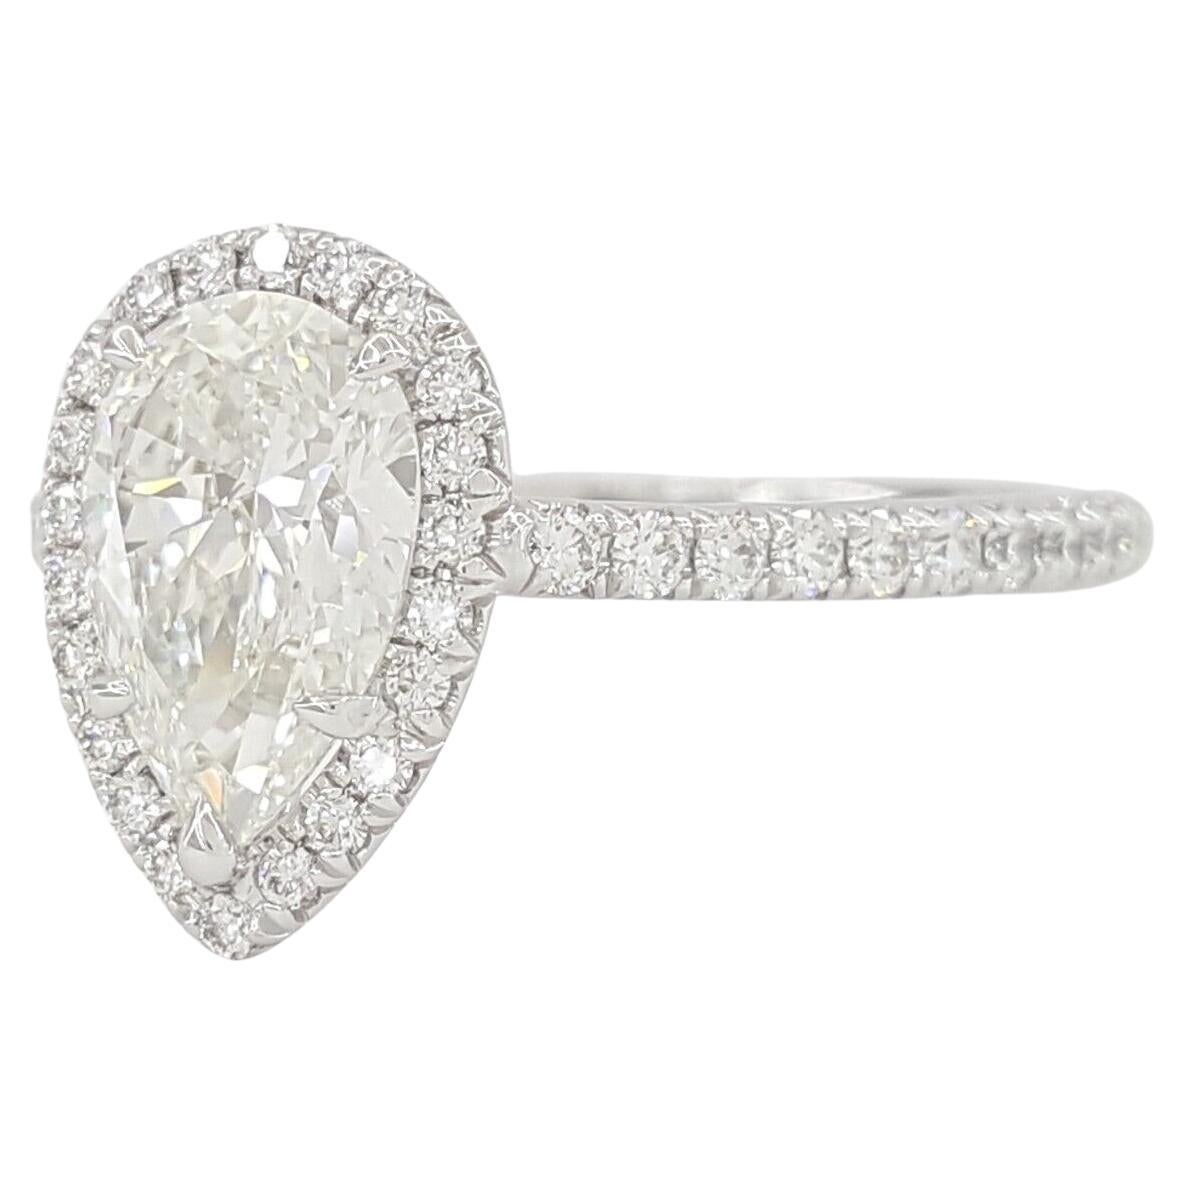 Tiffany & Co. Platinum Soleste® 1.36 ct Pear Diamond Halo Engagement Ring.

The ring weighs 3.4 grams, size 5.5, the center stone is a Natural 1.05 ct Pear Brilliant Cut Diamond,